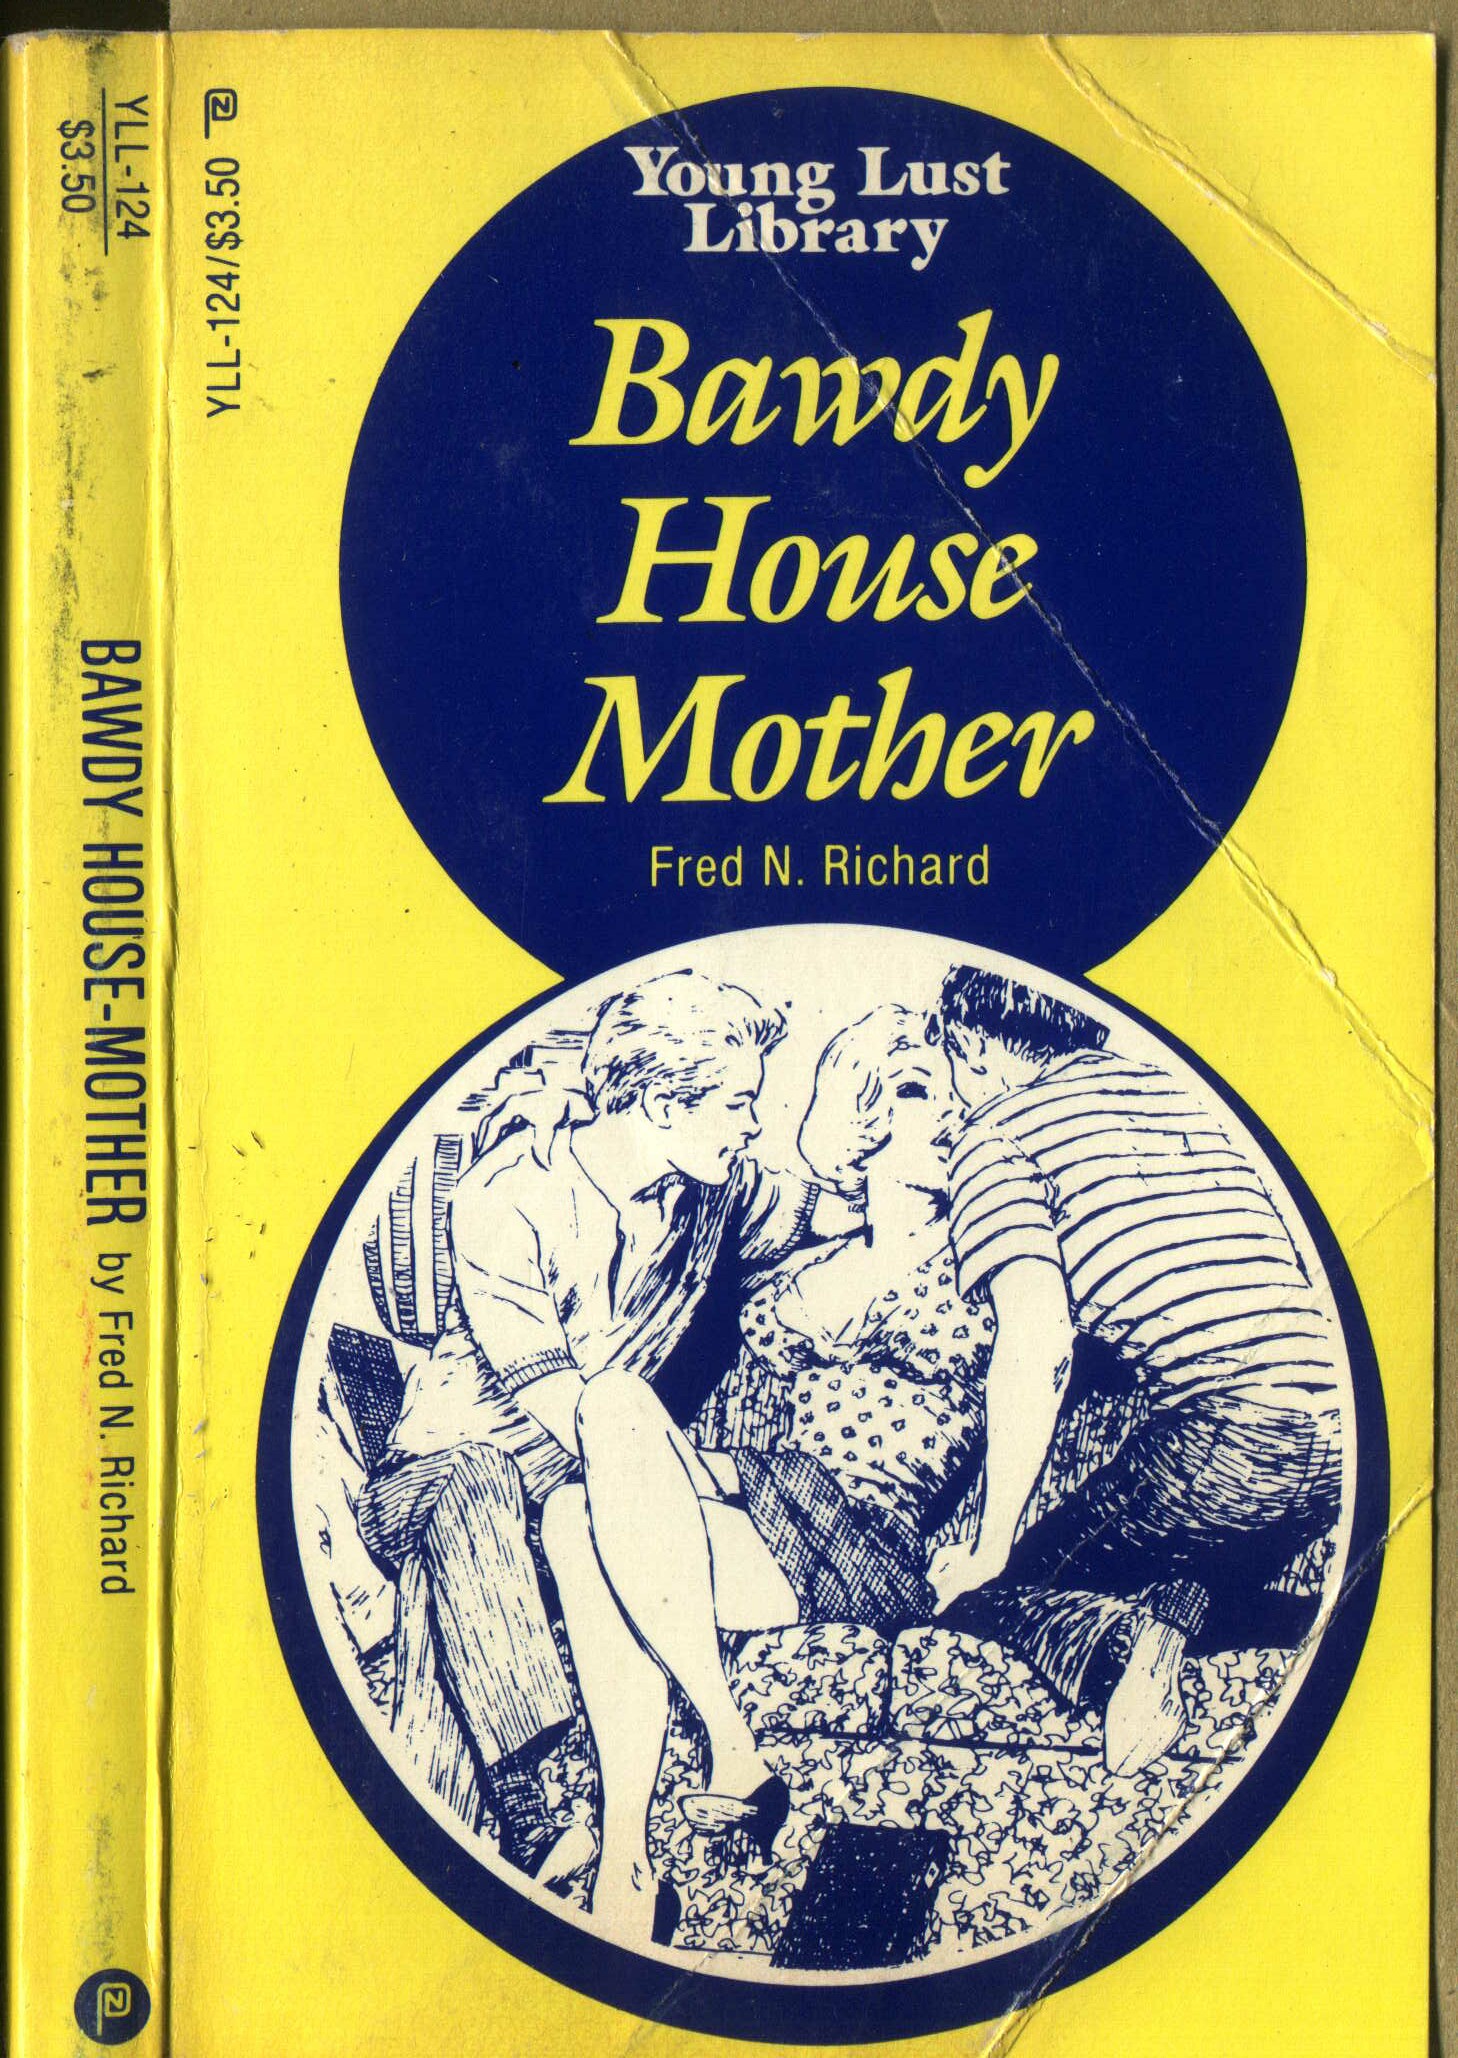 Bawdy-House Mother